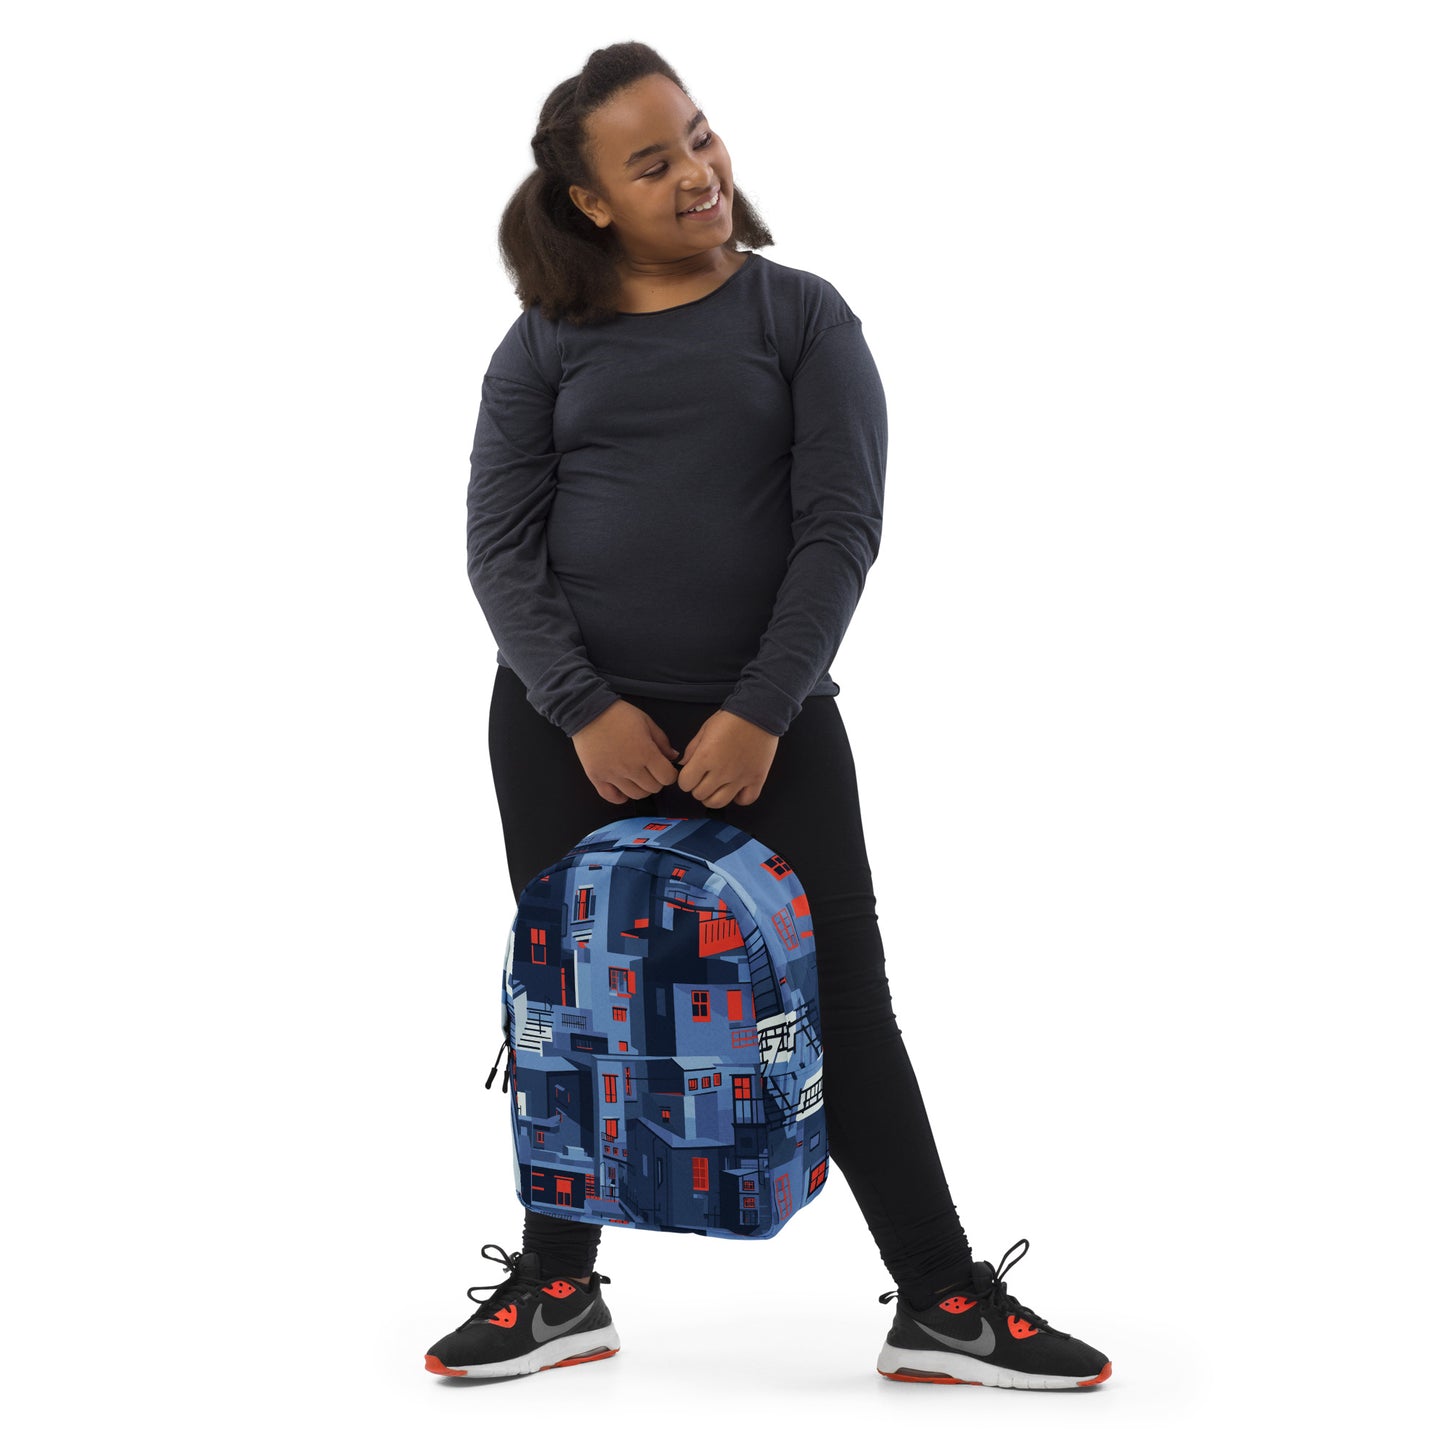 City scape backpack